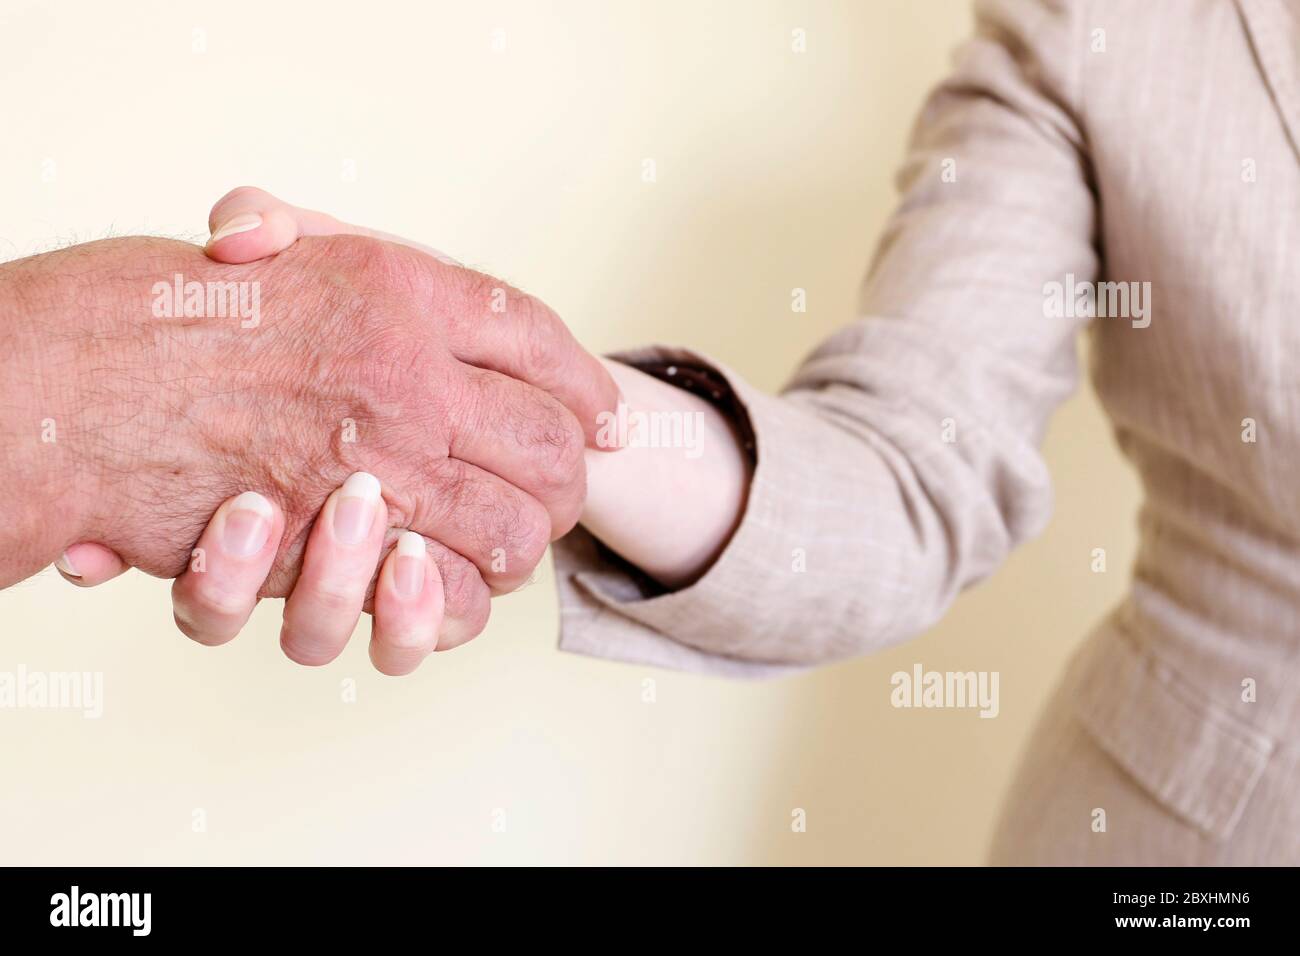 The woman and the man made a business agreement. They are shaking hands. Stock Photo